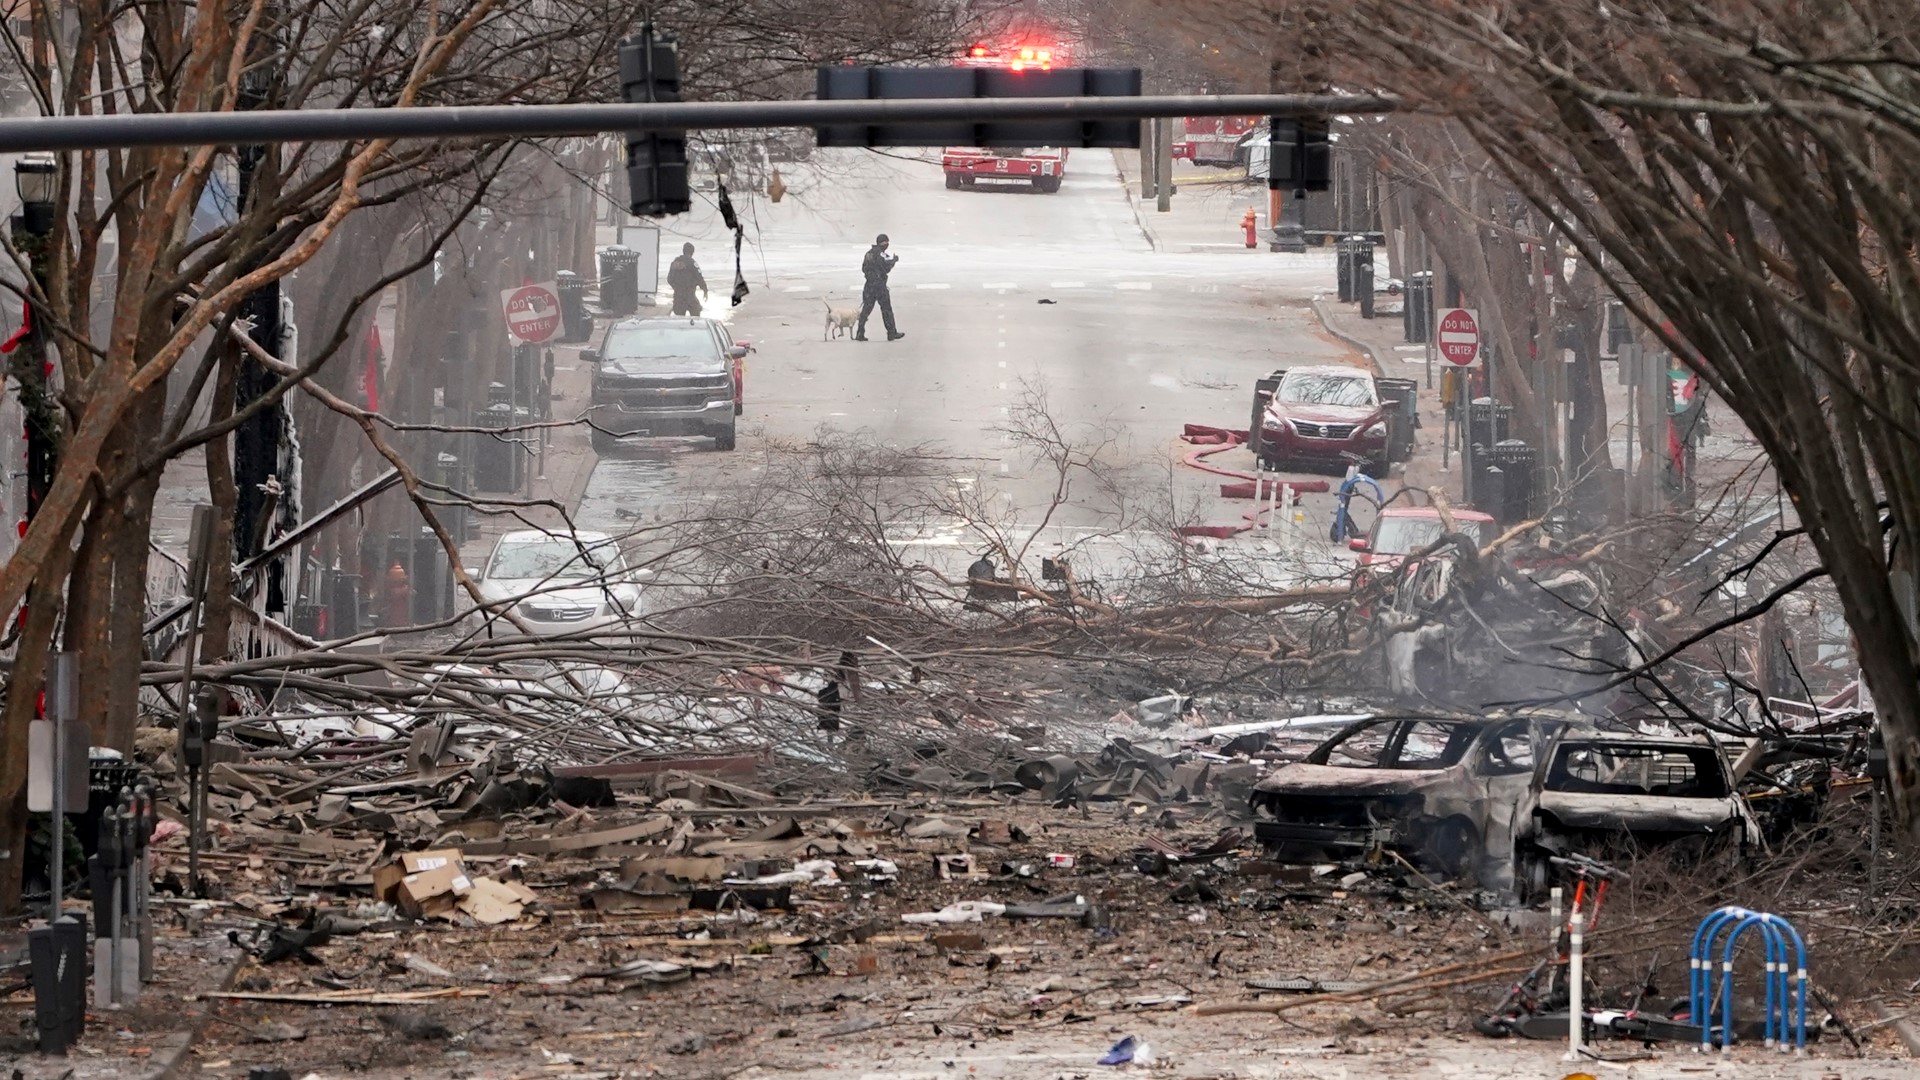 Federal and local authorities have vowed to catch whoever set off Friday morning's explosion on Second Avenue, a popular bar and entertainment area.